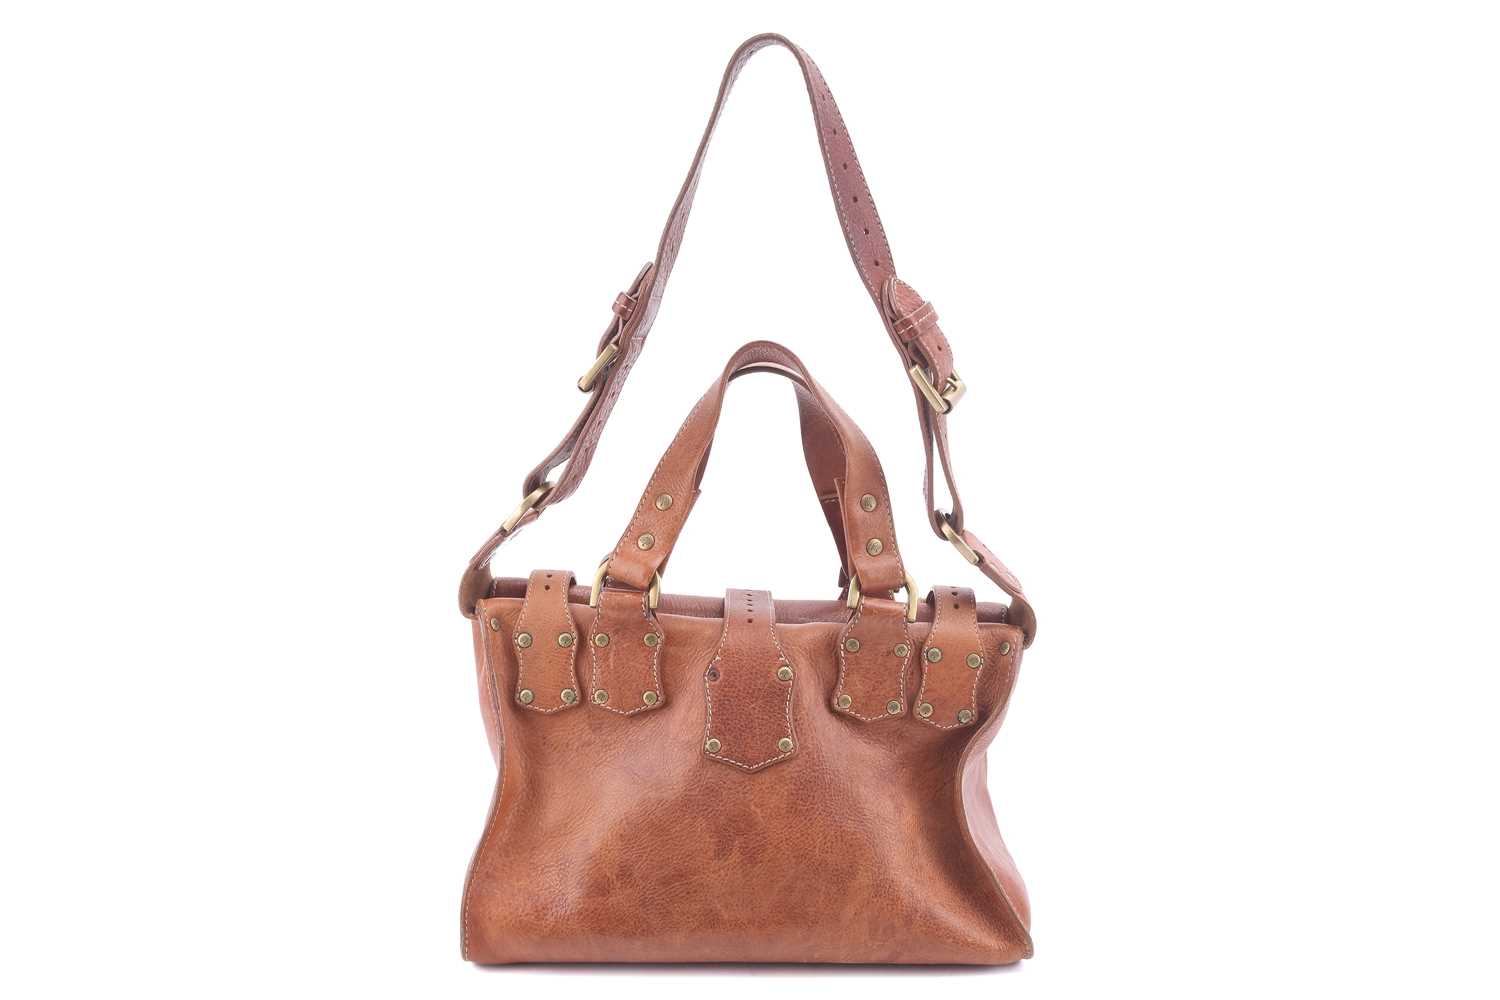 Mulberry - 'Roxanne' satchel in tanned leather, with external pockets, belt closure, equipped with - Image 3 of 9